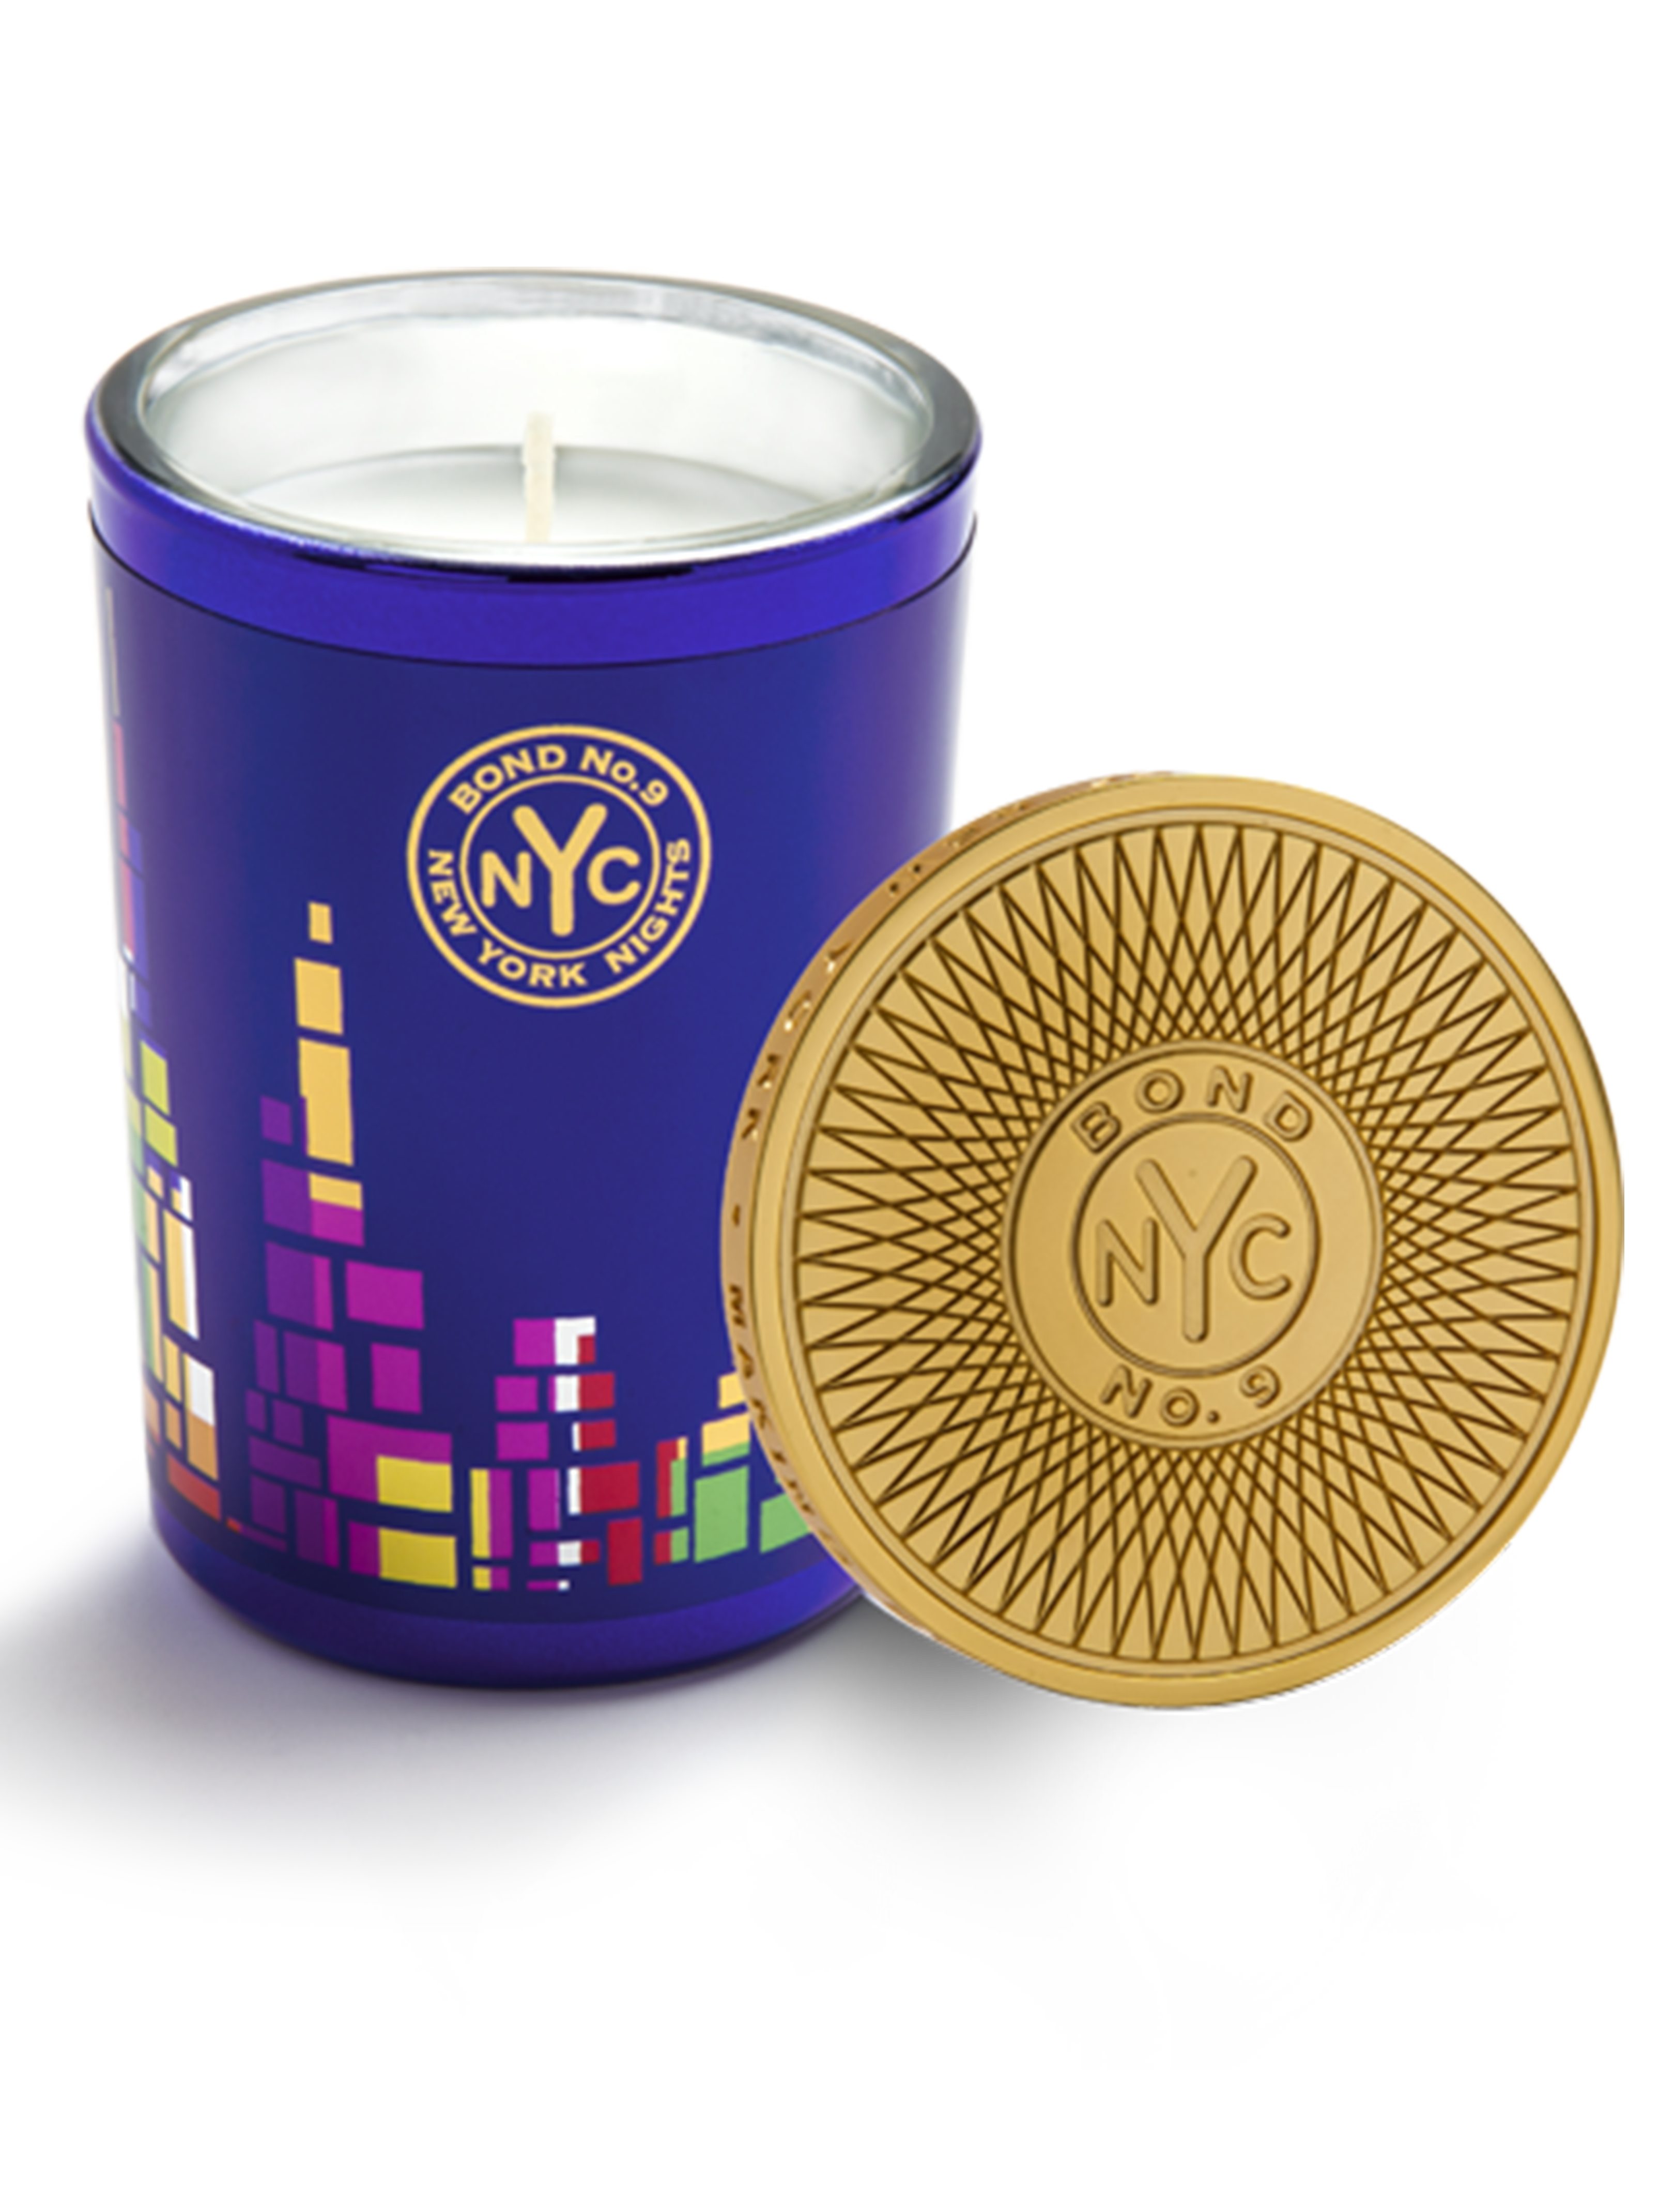 BOND No 9 NYC QUEENS Scented Candle Tester 180g 6.4 oz 